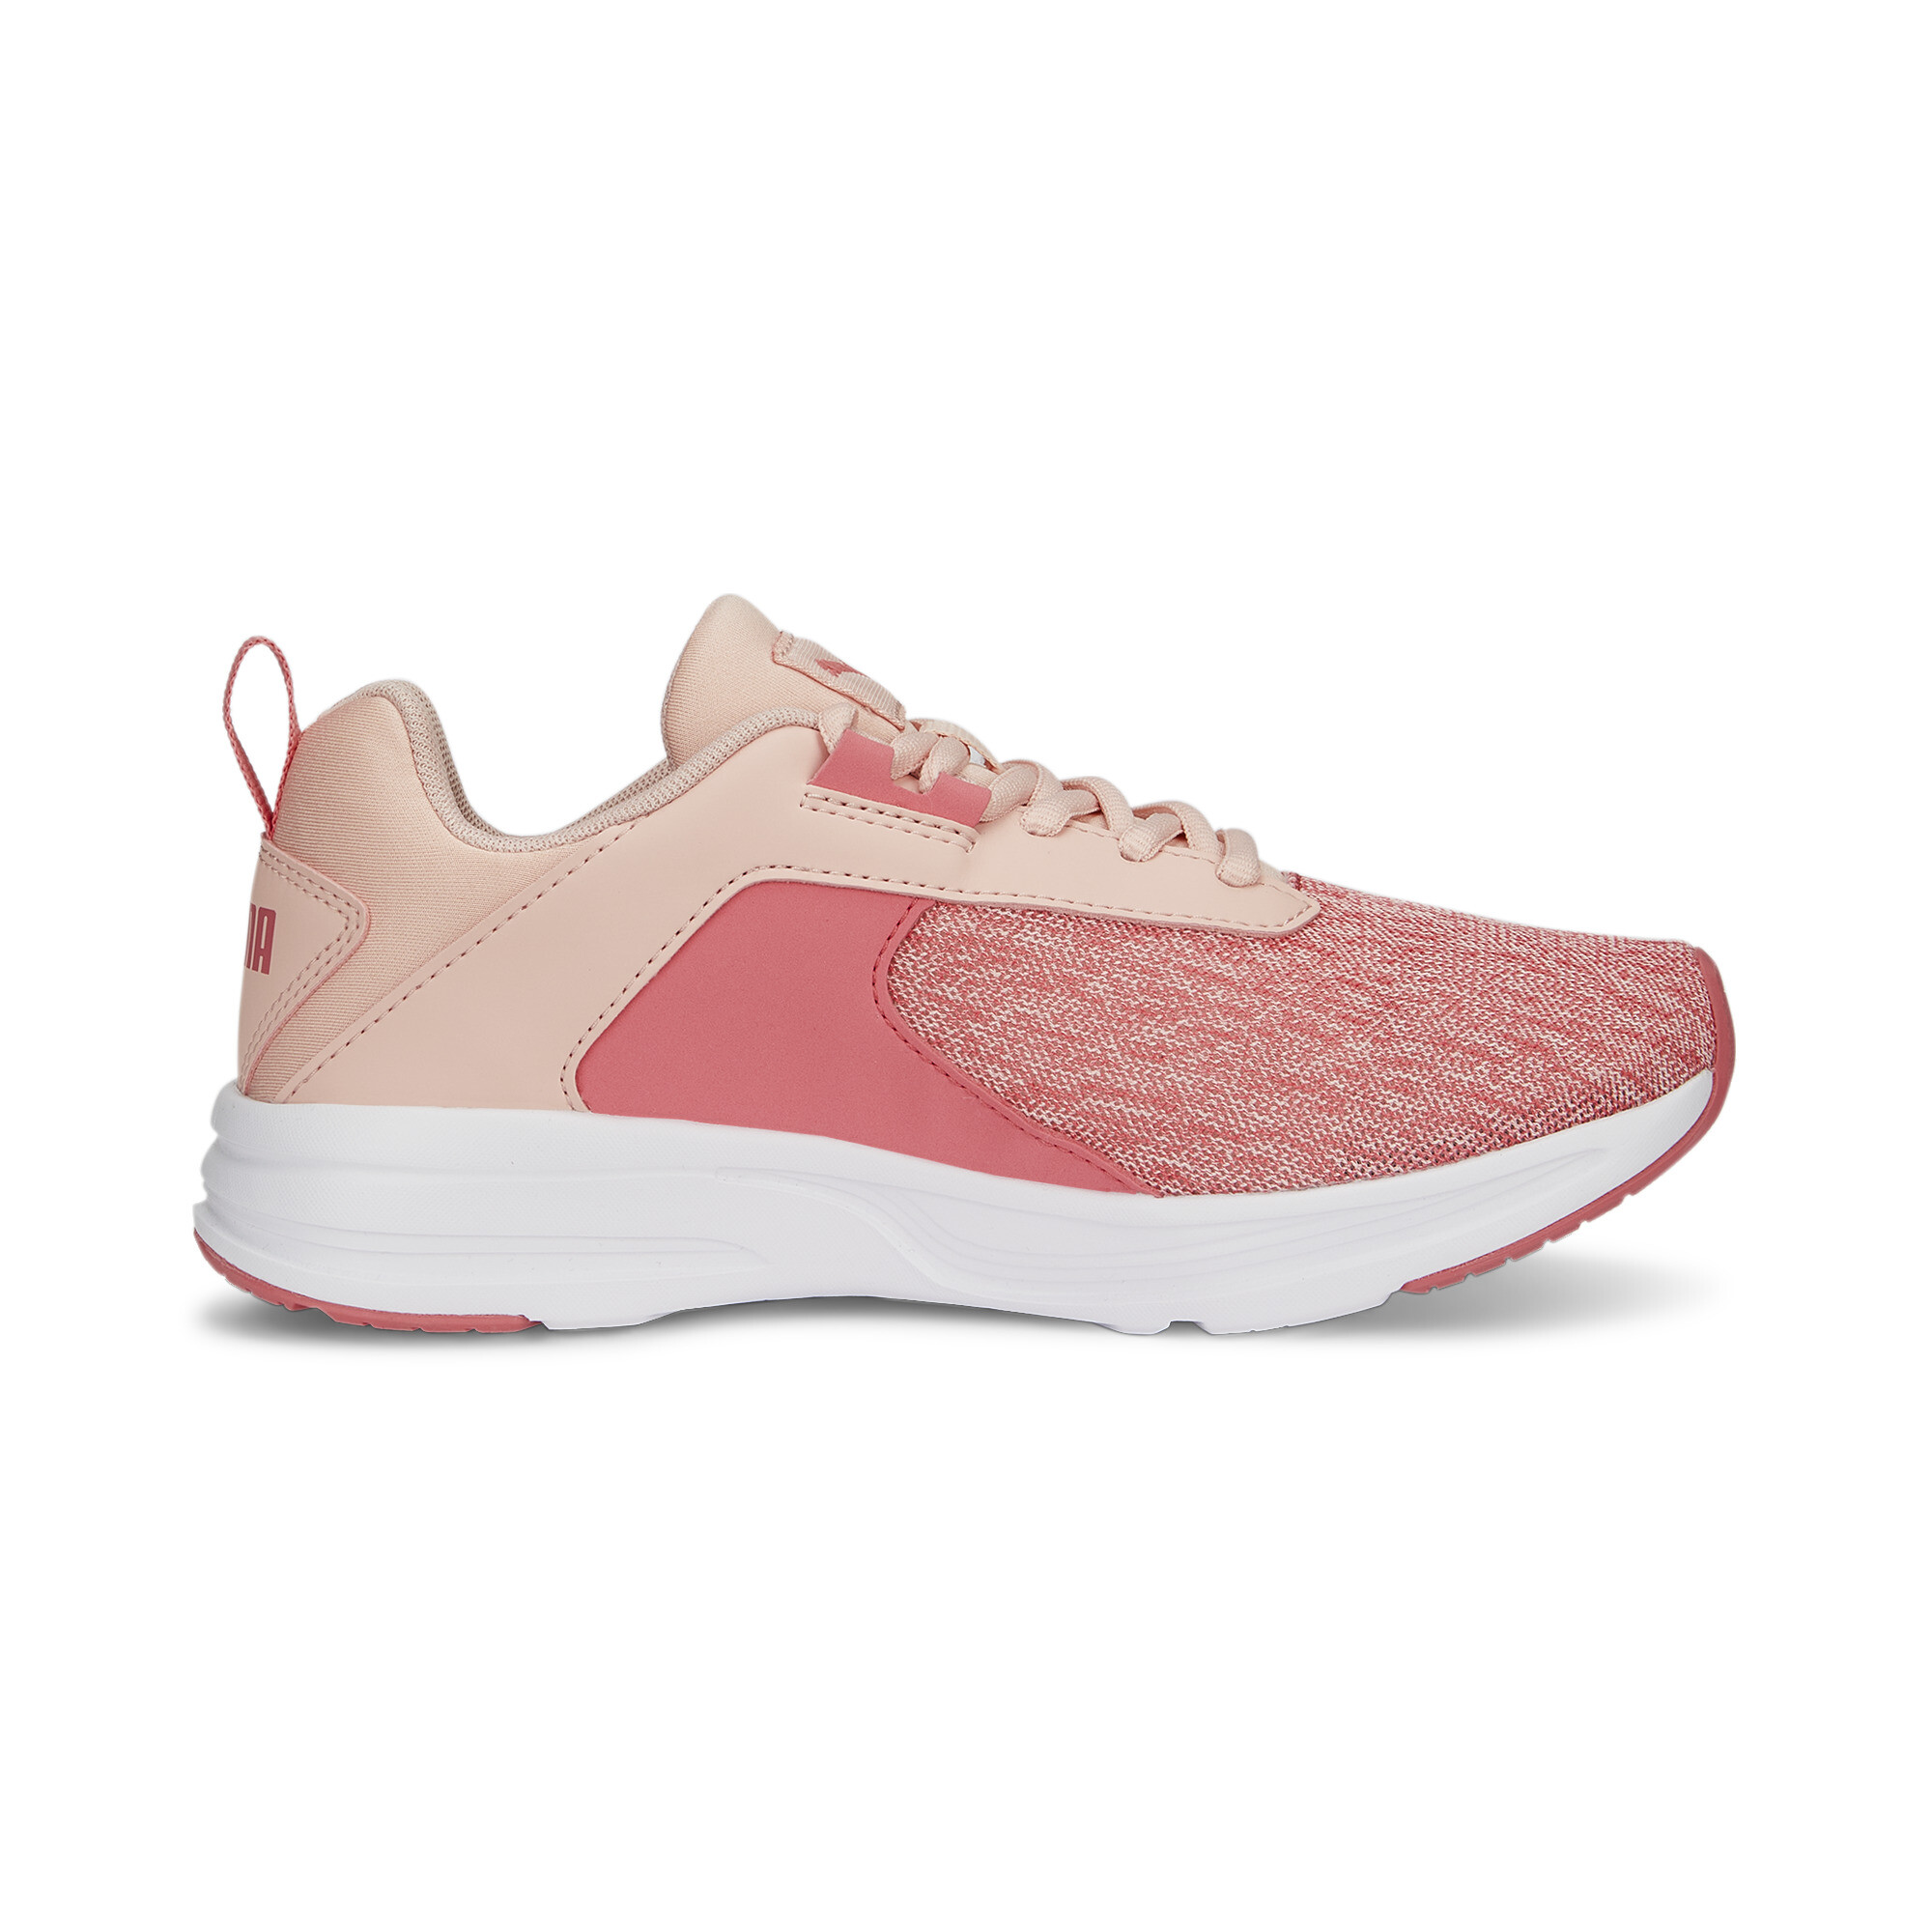 Puma Comet 2 Alt Youth Trainers, Pink, Size 38, Shoes